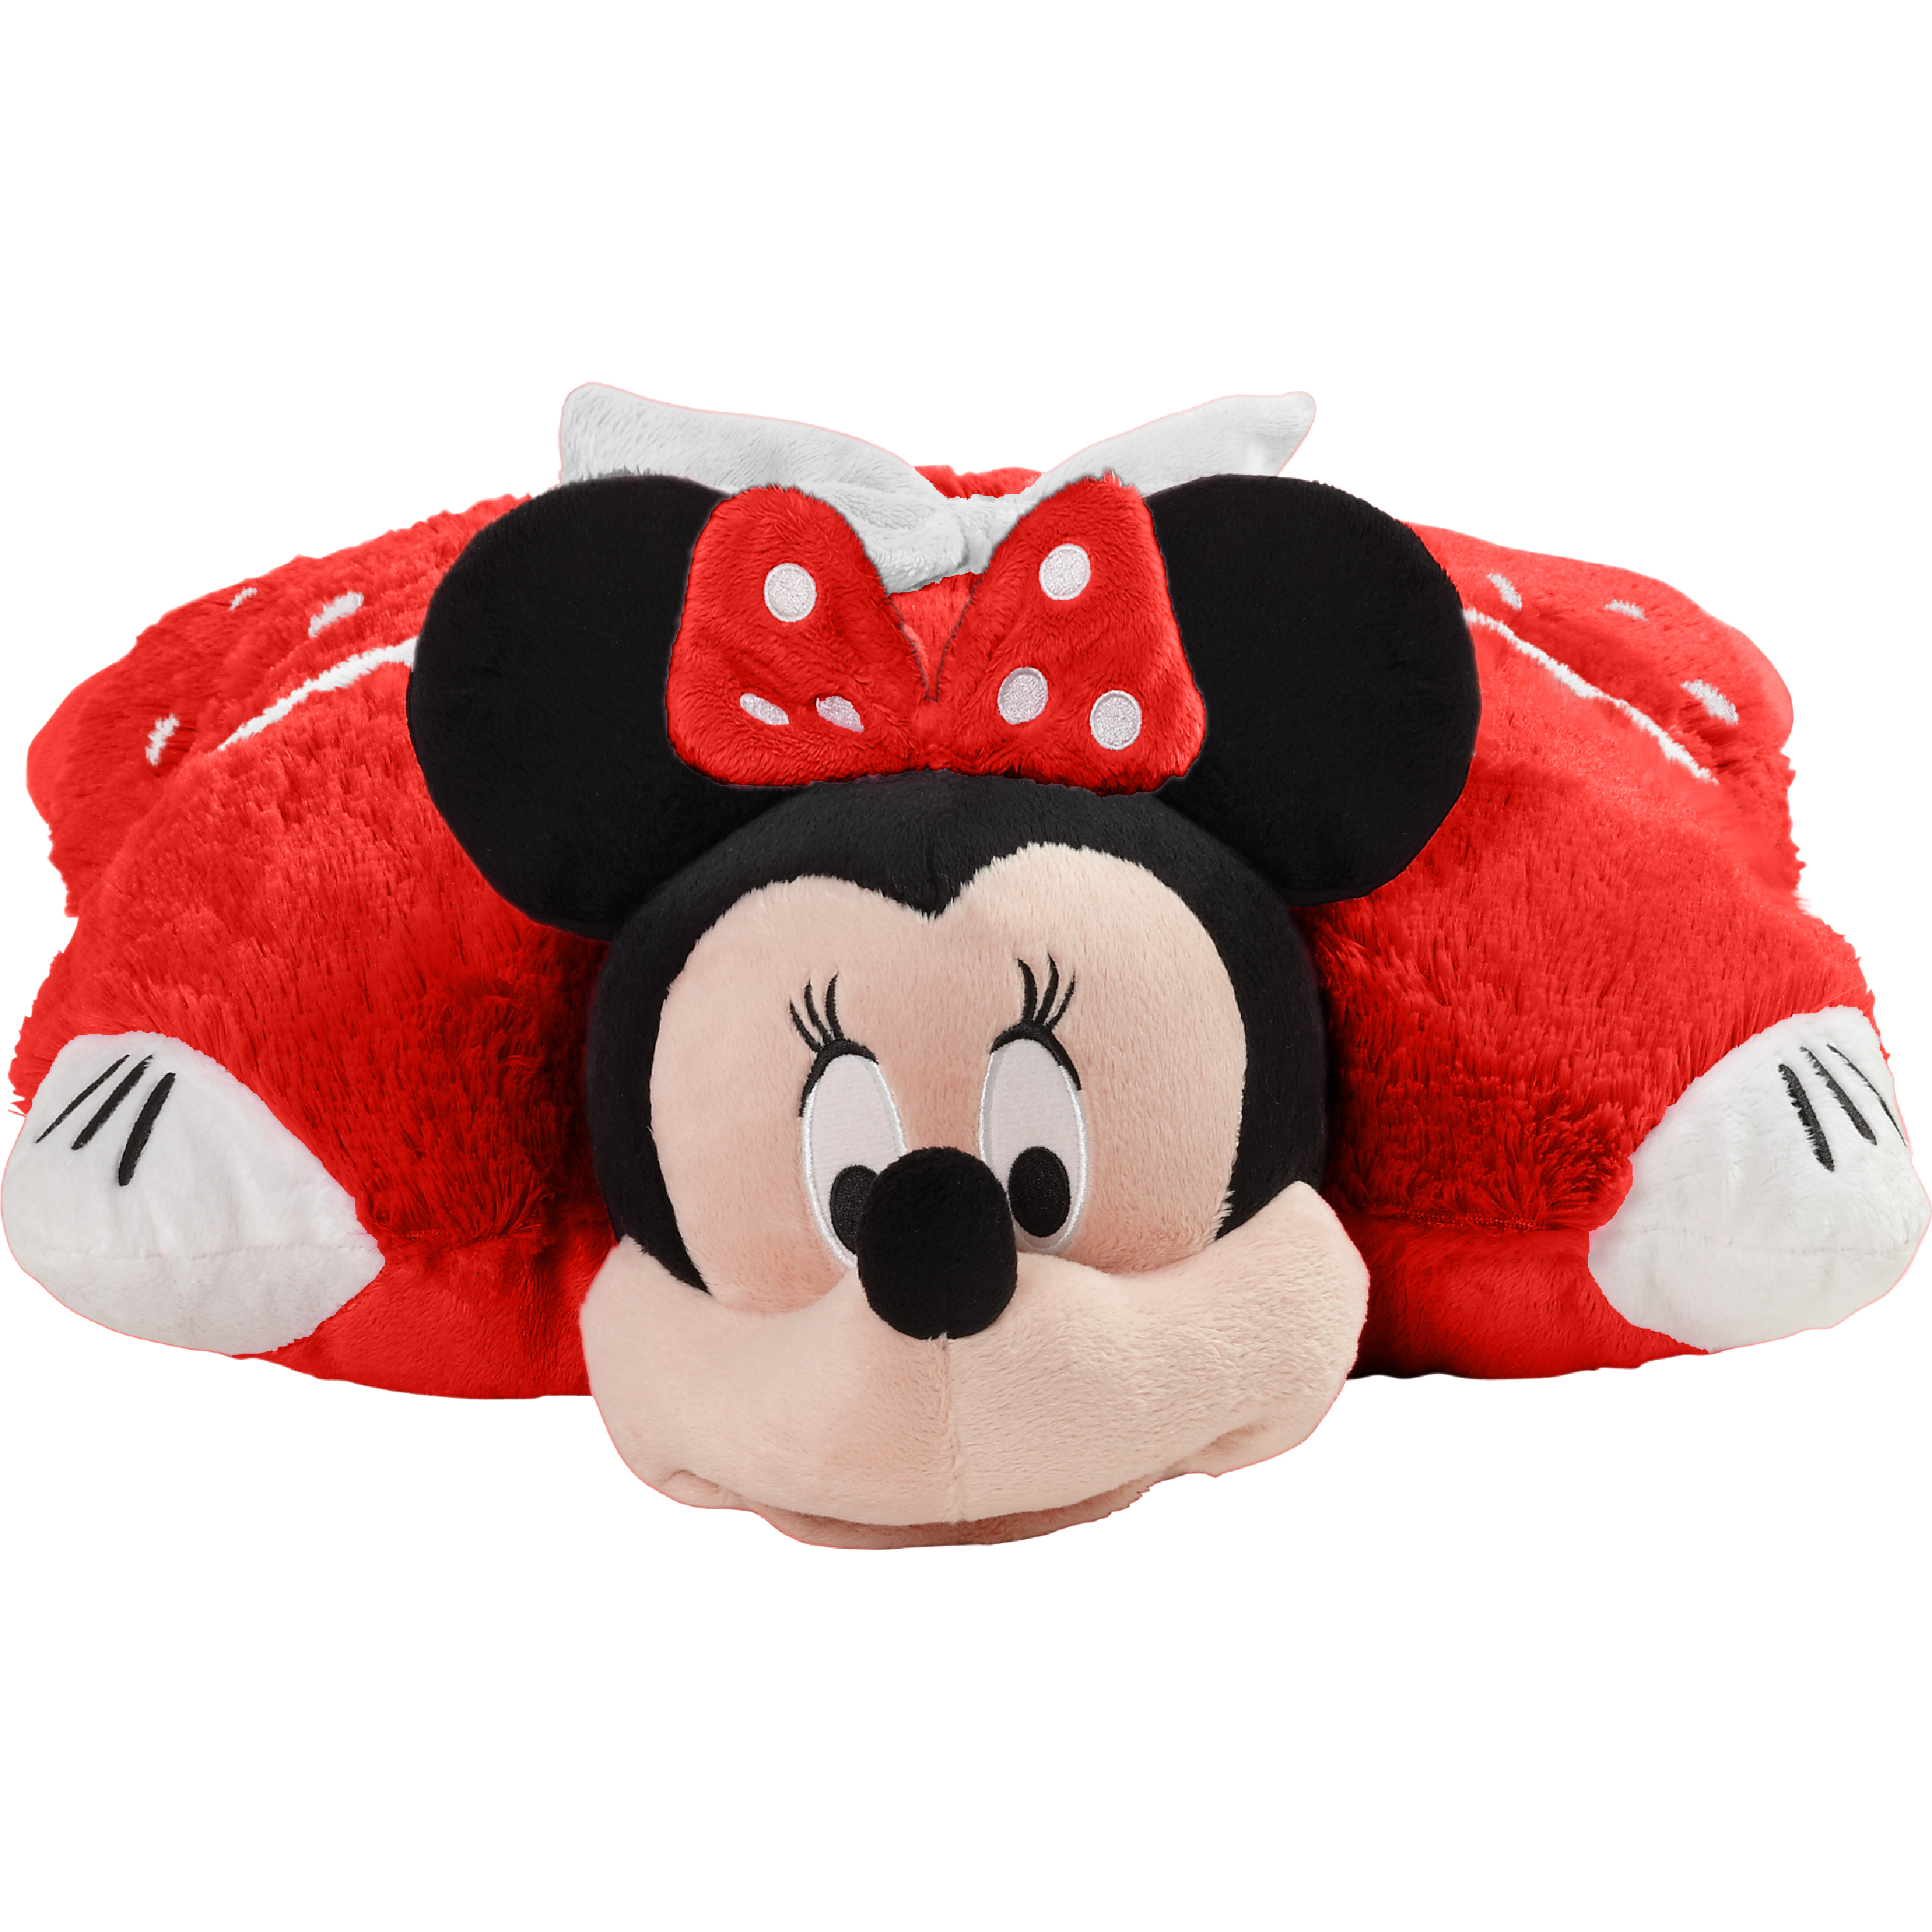 We're Having A Disney Pillow Pets Giveaway! Featuring Classic Mickey and Minnie!